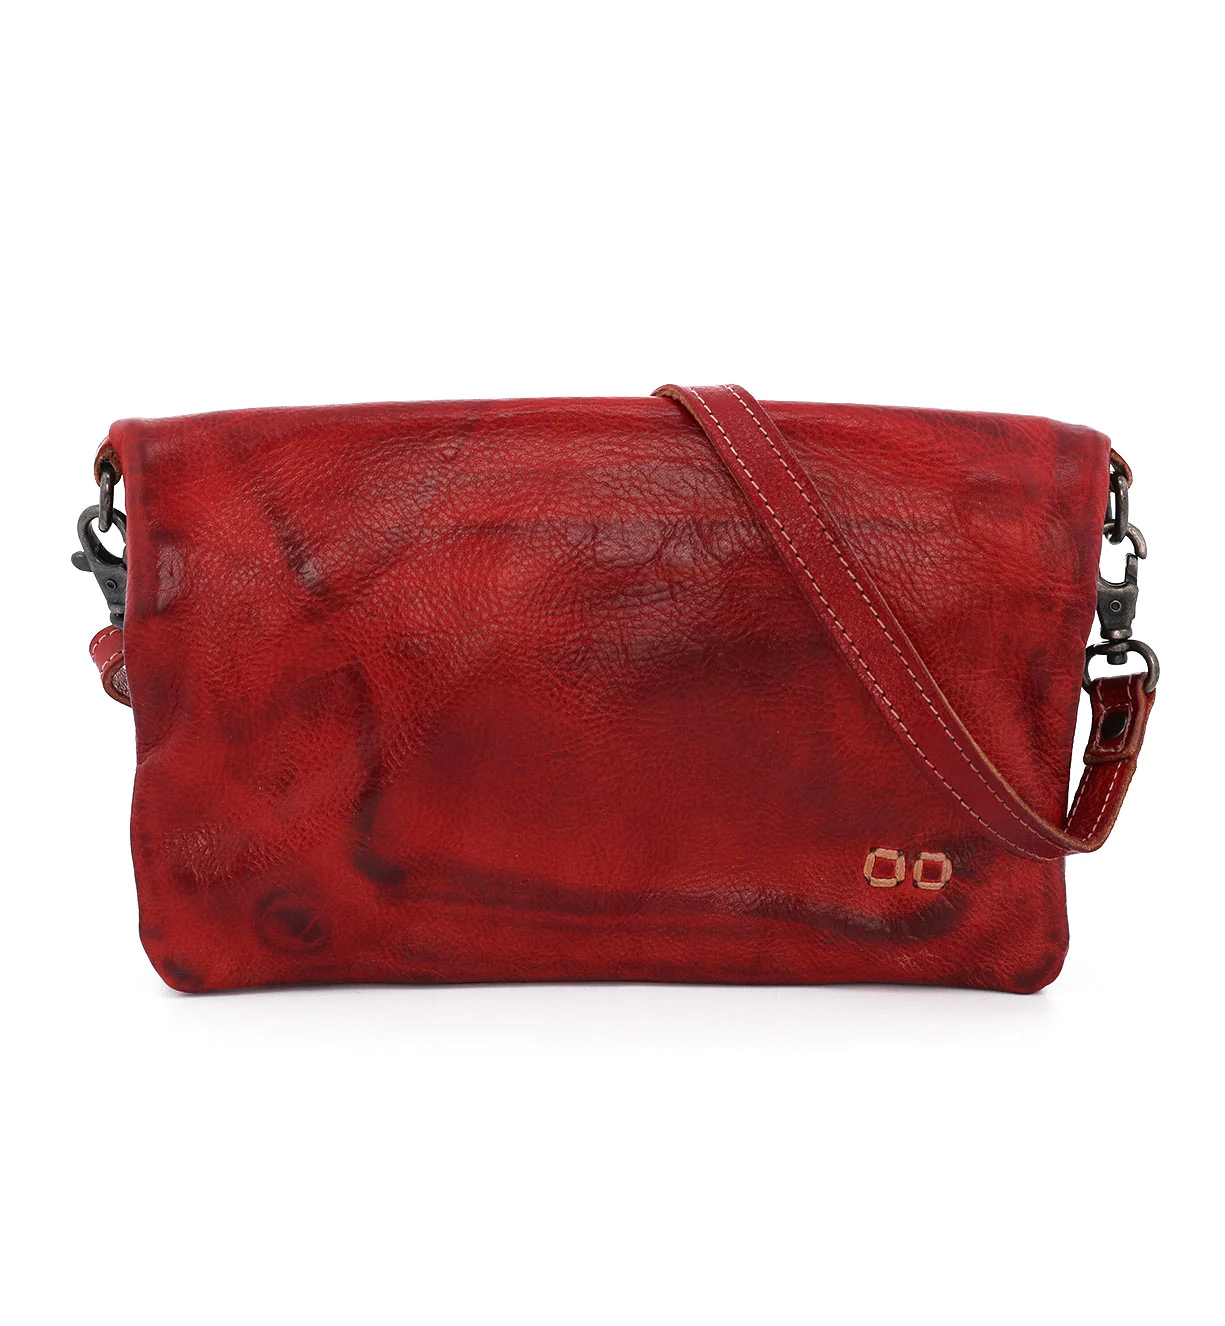 Load image into Gallery viewer, Bed Stu Cadence Hobo Wallet in Red Rustic - SpiritedBoutiques Boho Hippie Boutique Style General, Bed Stu
